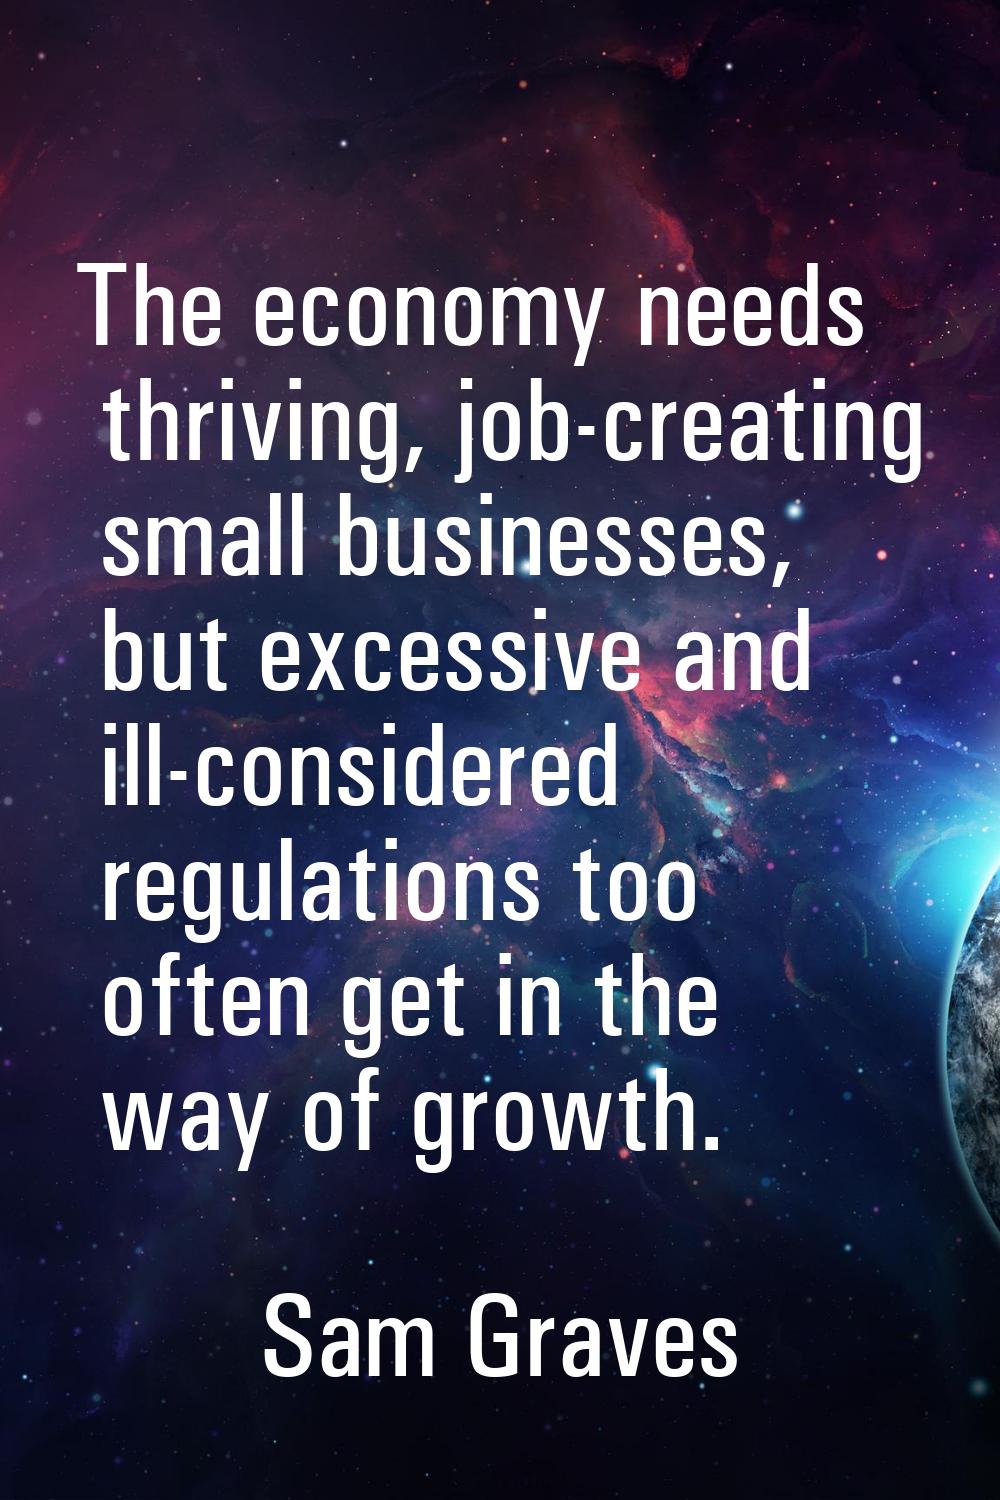 The economy needs thriving, job-creating small businesses, but excessive and ill-considered regulat